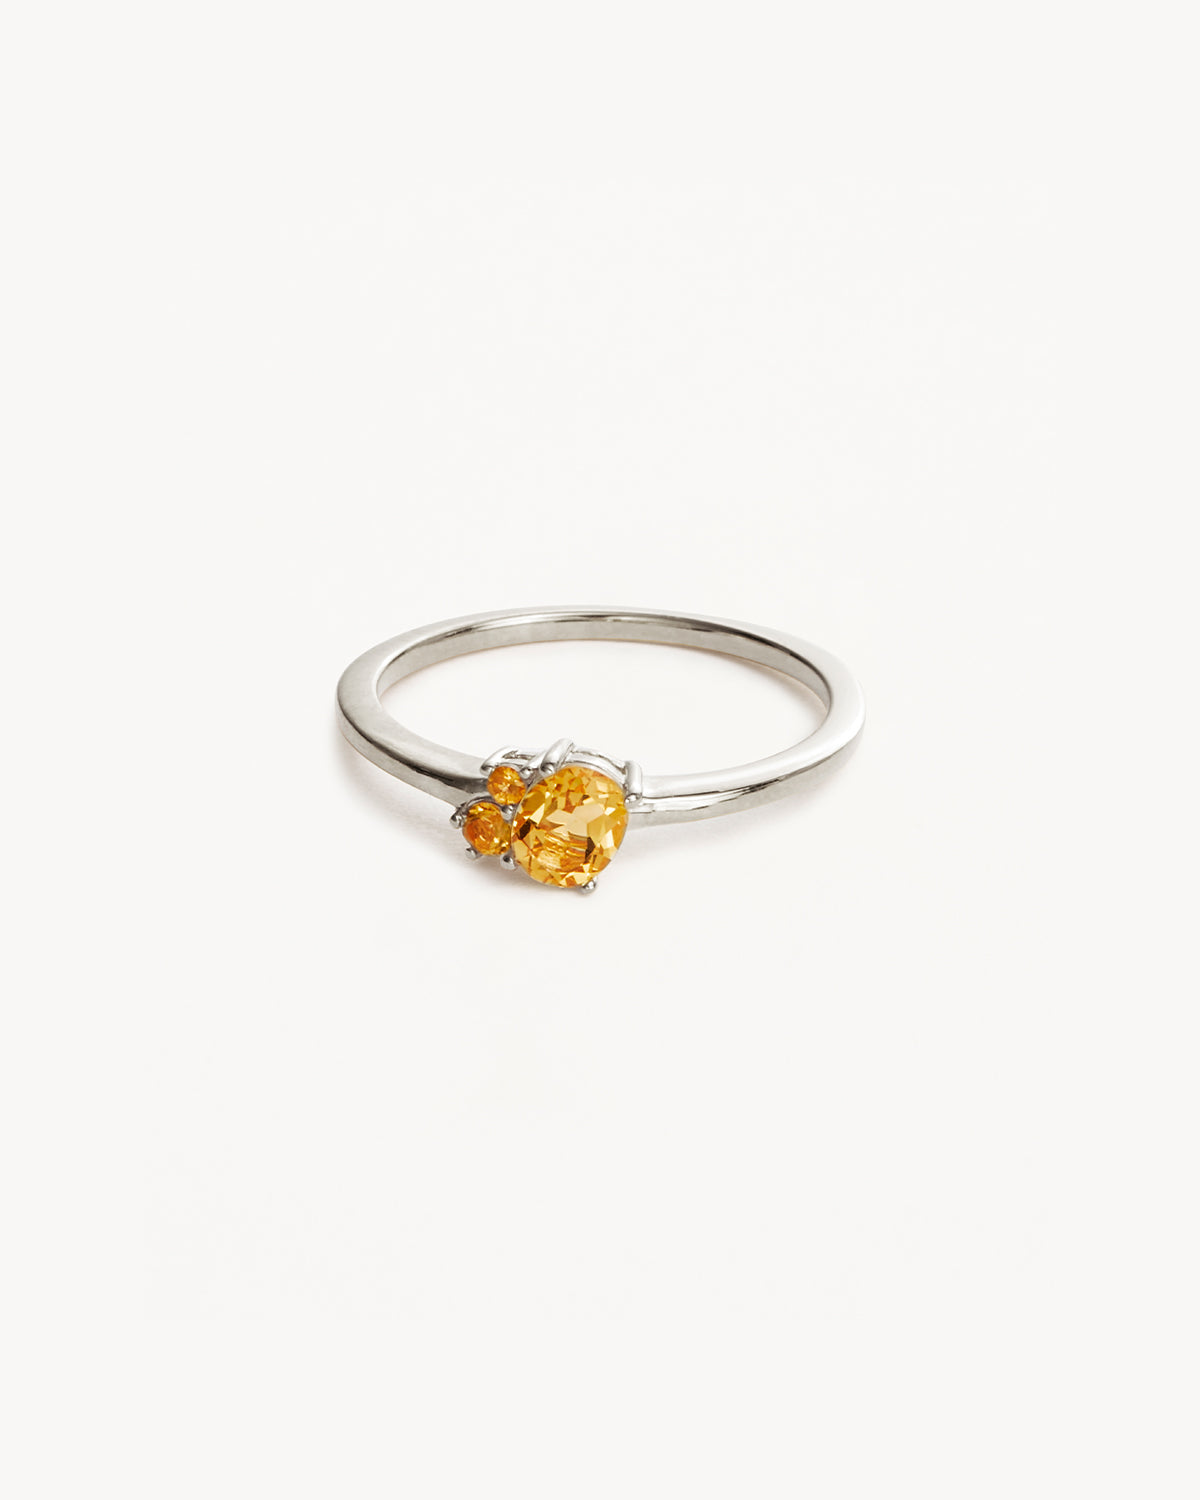 By Charlotte Kindred November Birthstone Ring, Gold or Silver